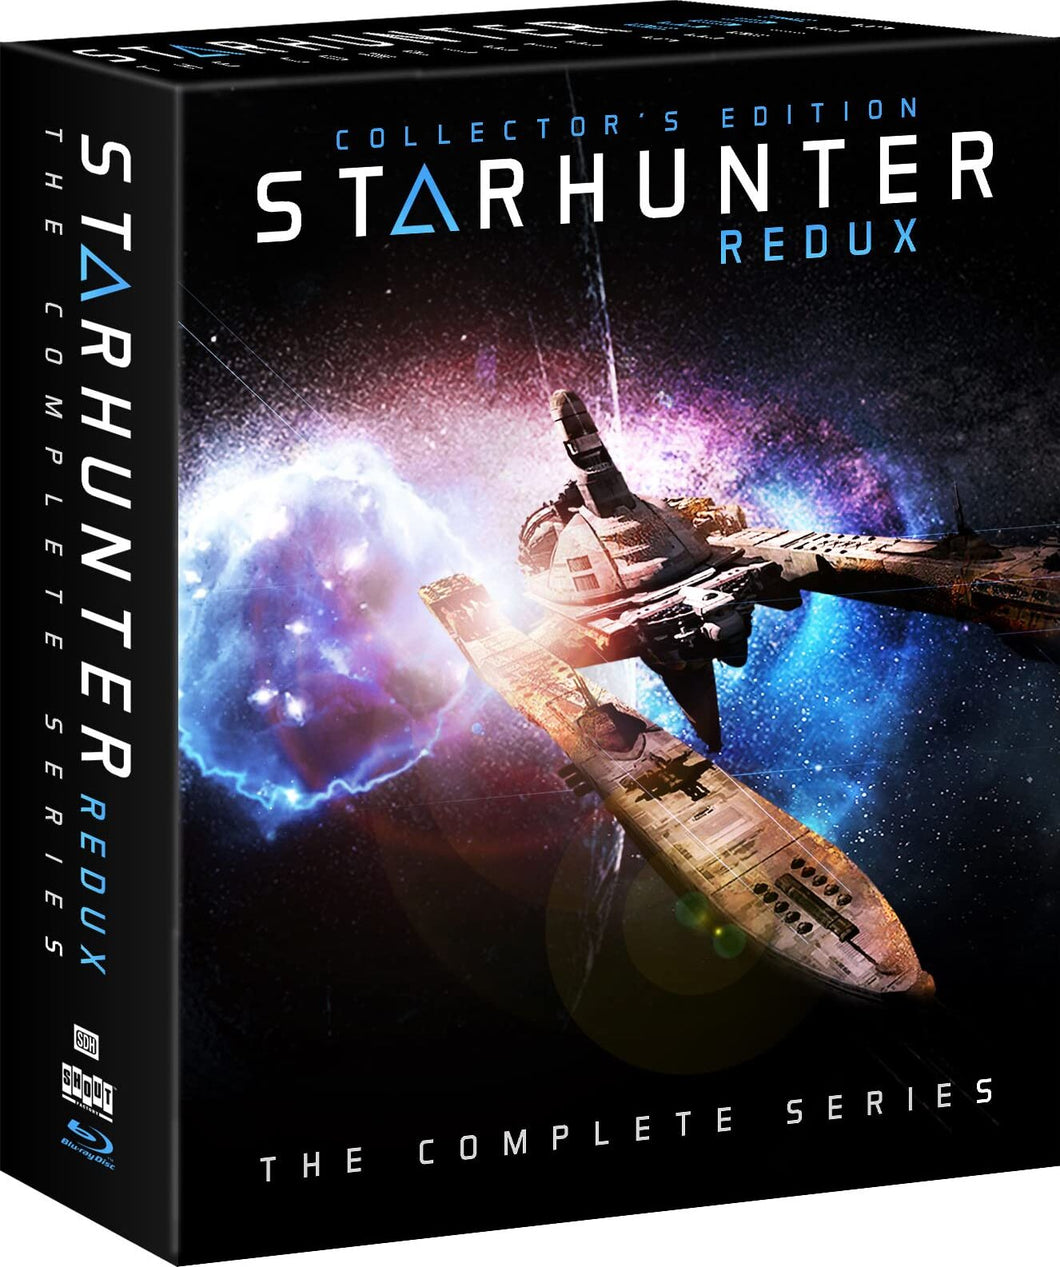 Starhunter ReduX: The Complete Series (2017) - front cover